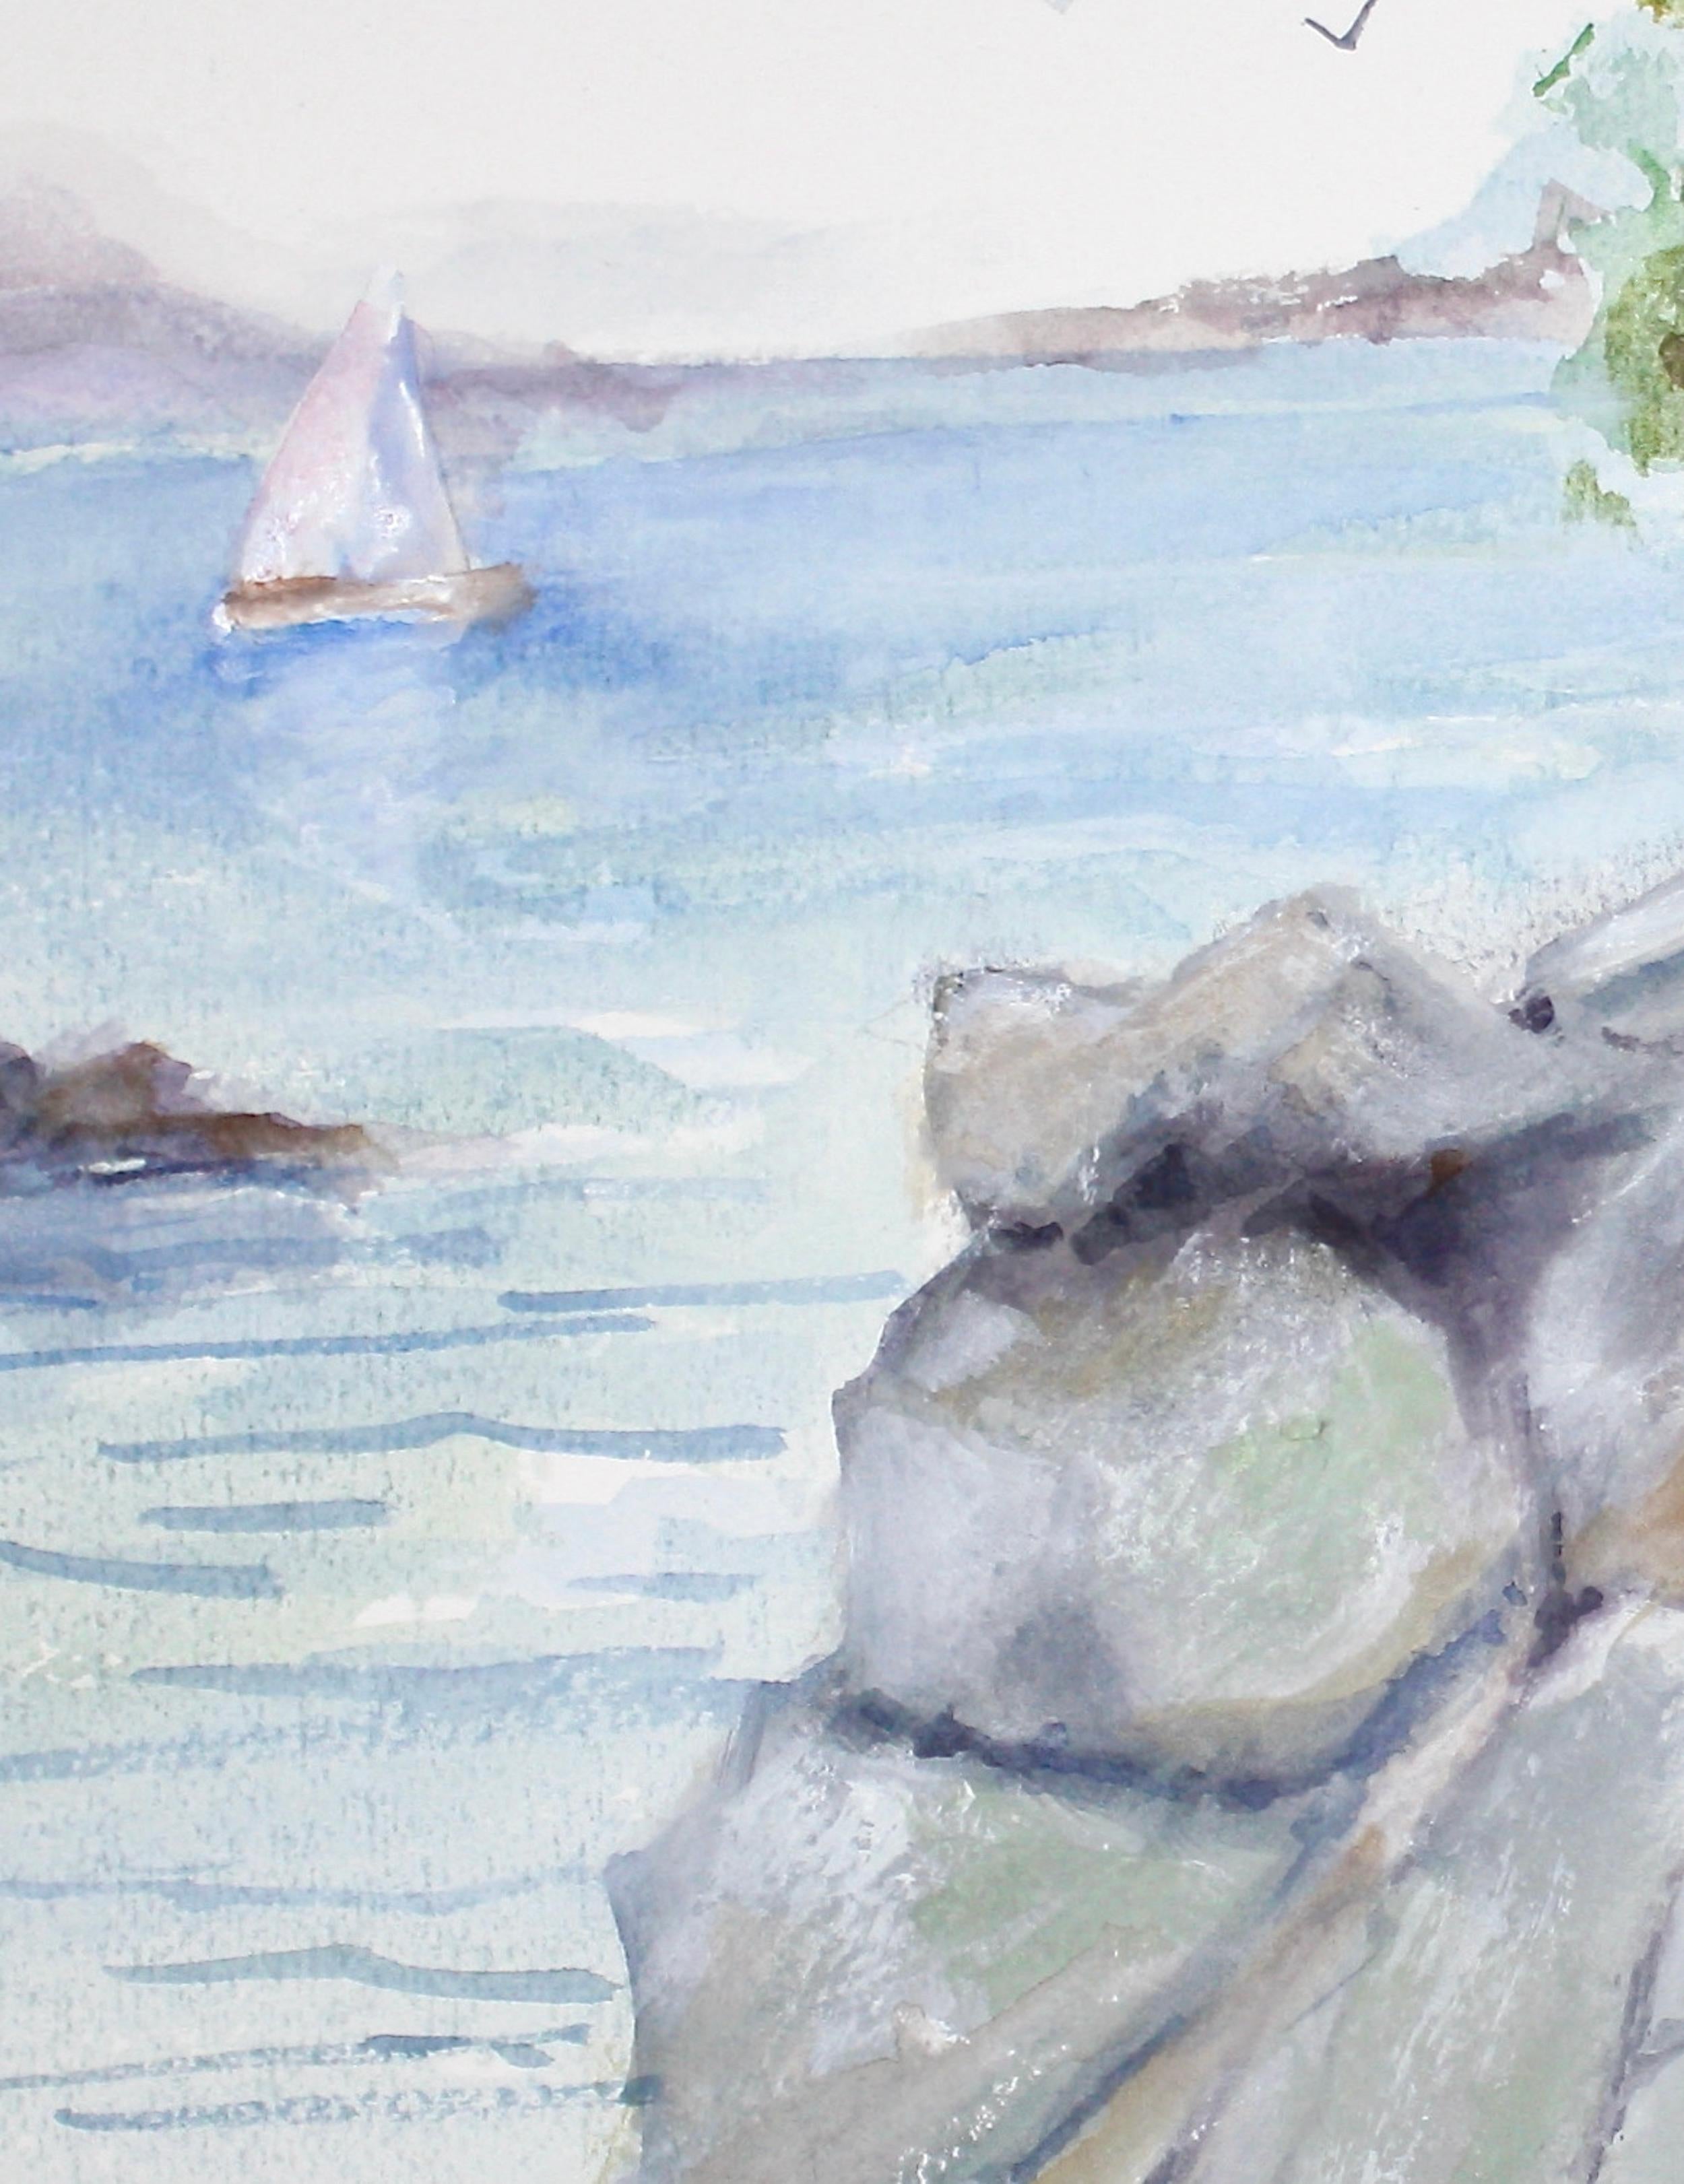 <p>Artist Comments<br>Artist Joe Giuffrida presents an impressionist view of Massachusetts's north shore. The craggy rocks of the land formations build an interesting contrast alongside the bay's waters. Delicate flowers grow between boulder seams